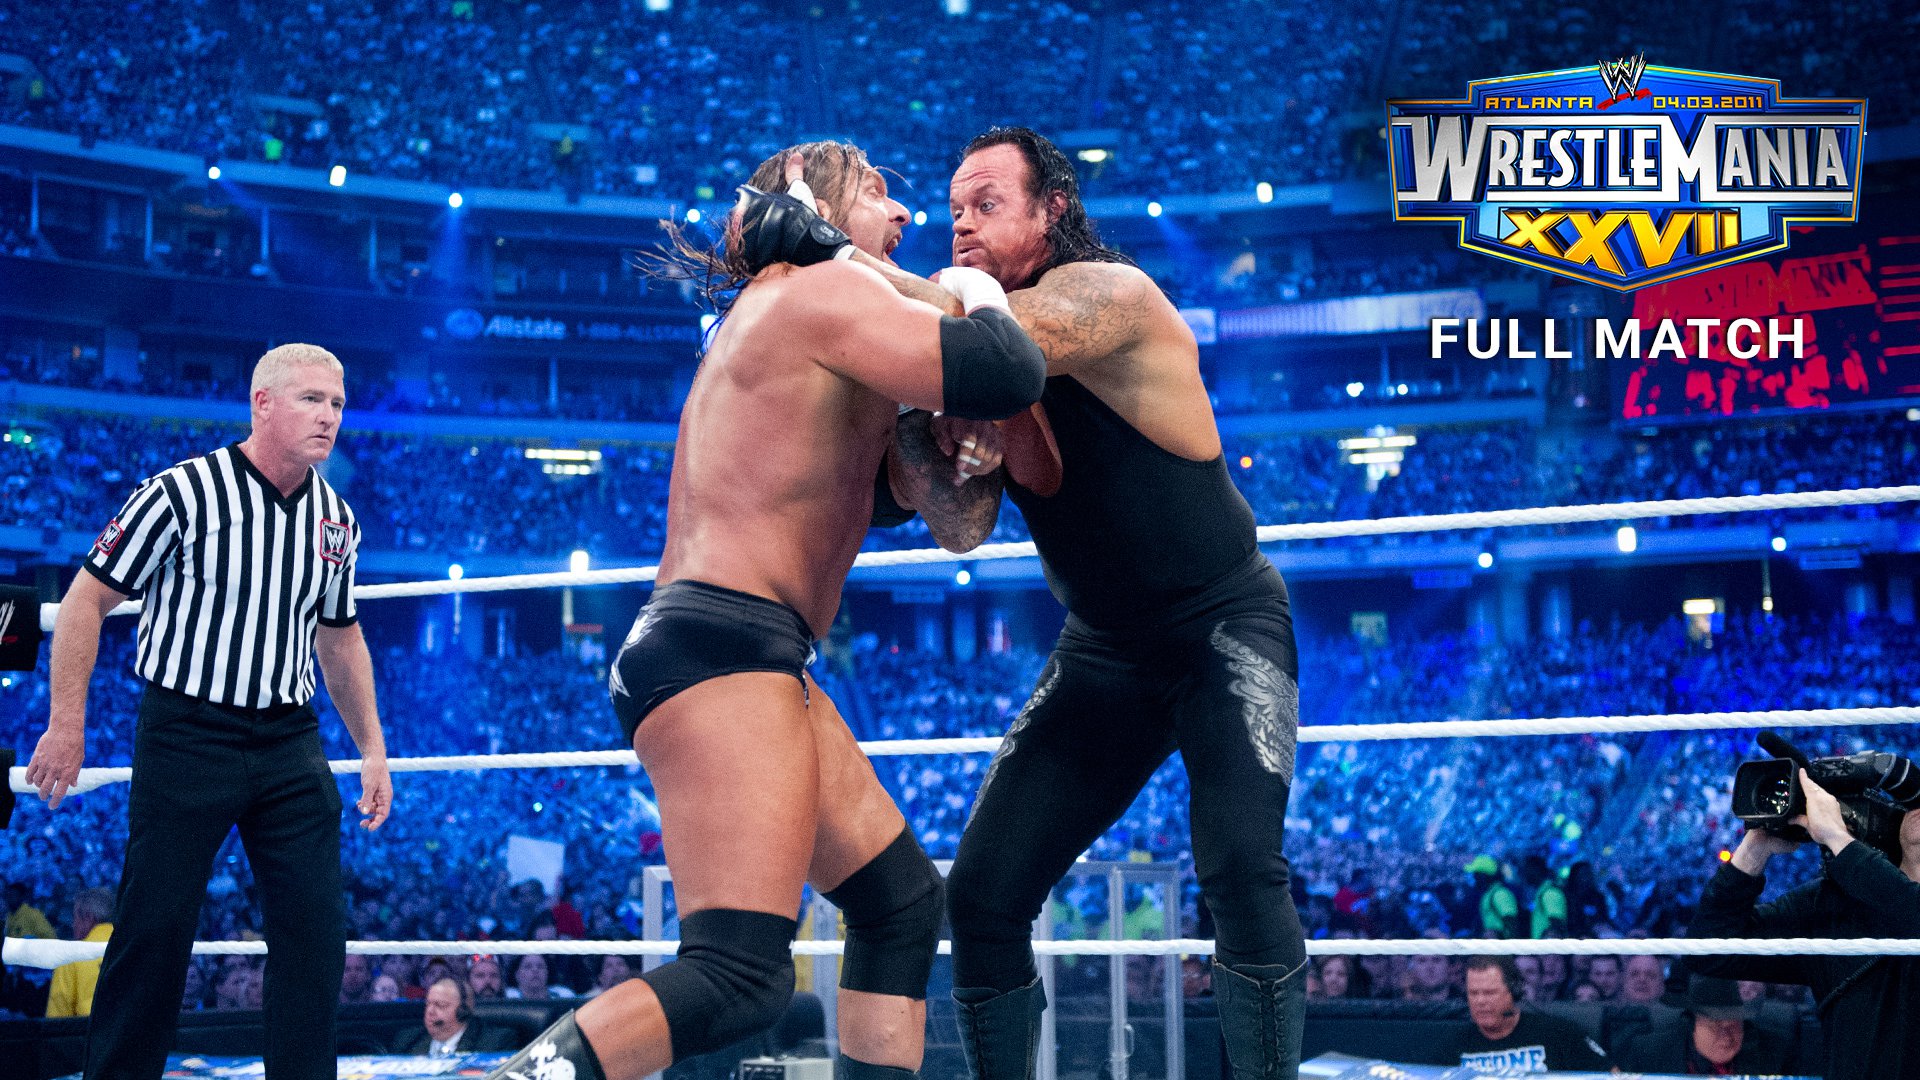 The Undertaker Vs Triple H A Match By Match Timeline Of Their